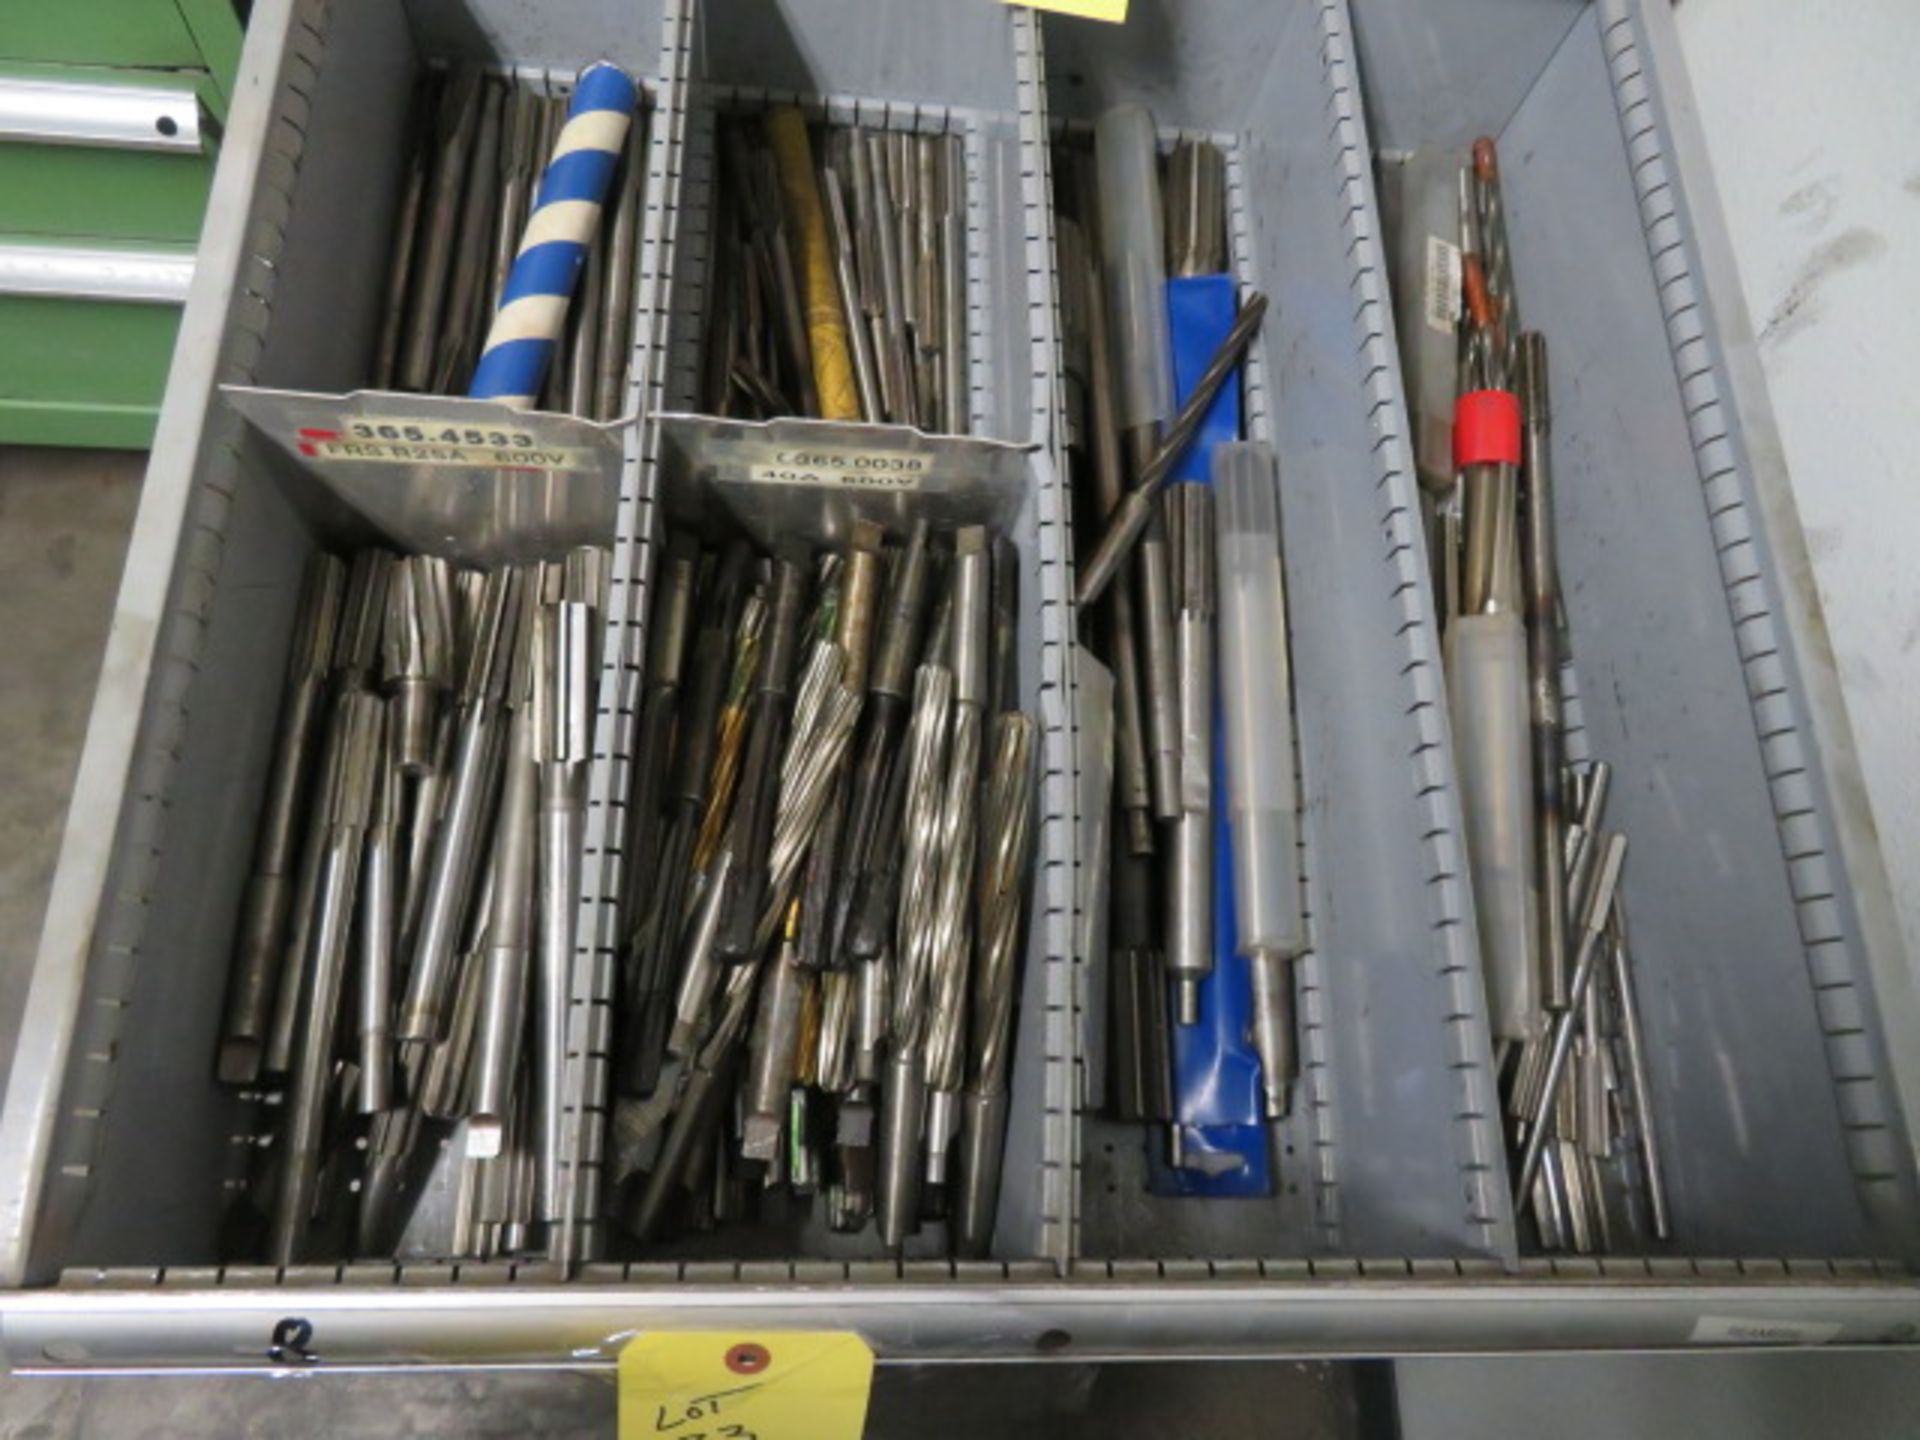 LOT CONSISTING OF: assorted drills & reamers (located in drawer 8)